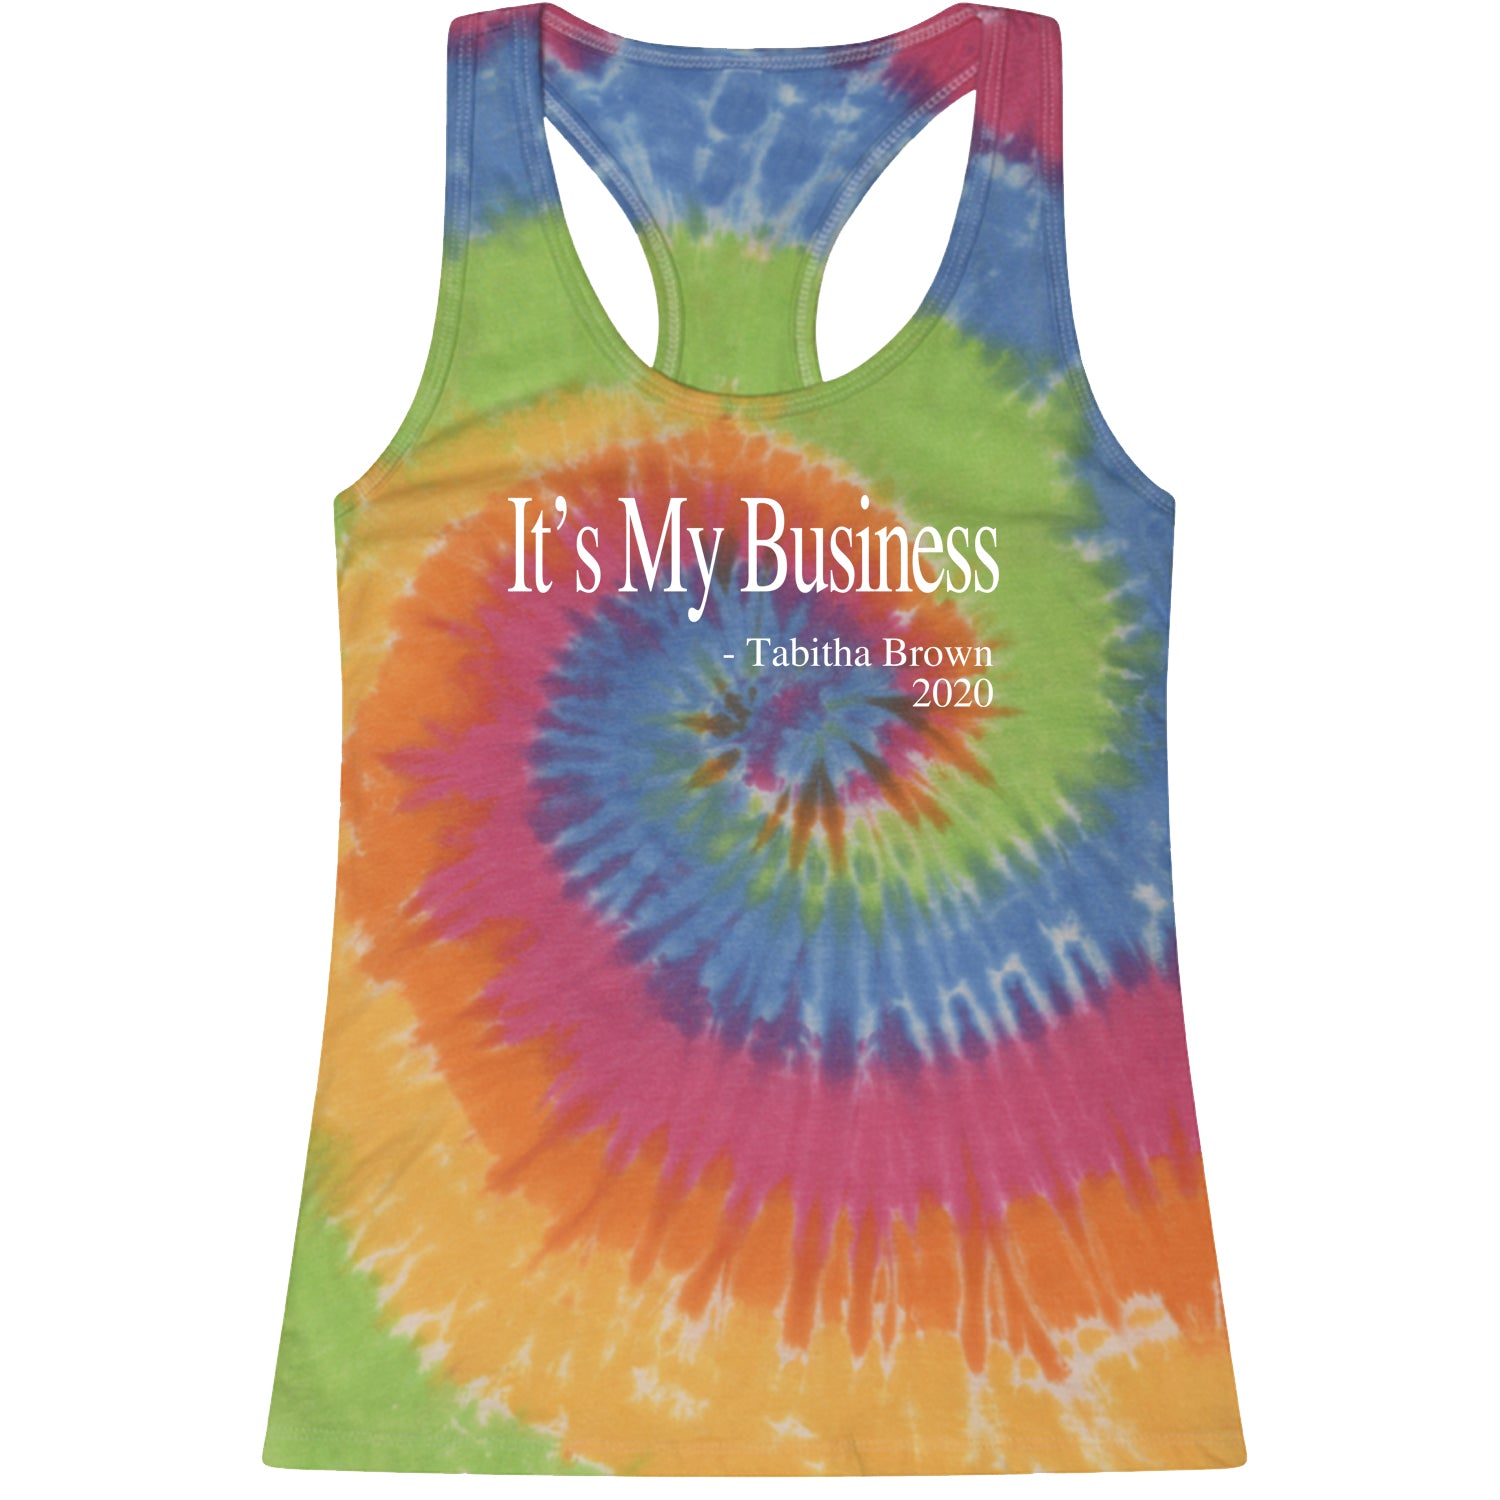 It's My Business Tabitha Brown Quote Racerback Tank Top for Women brown, feeding, soul, tabitha, the by Expression Tees